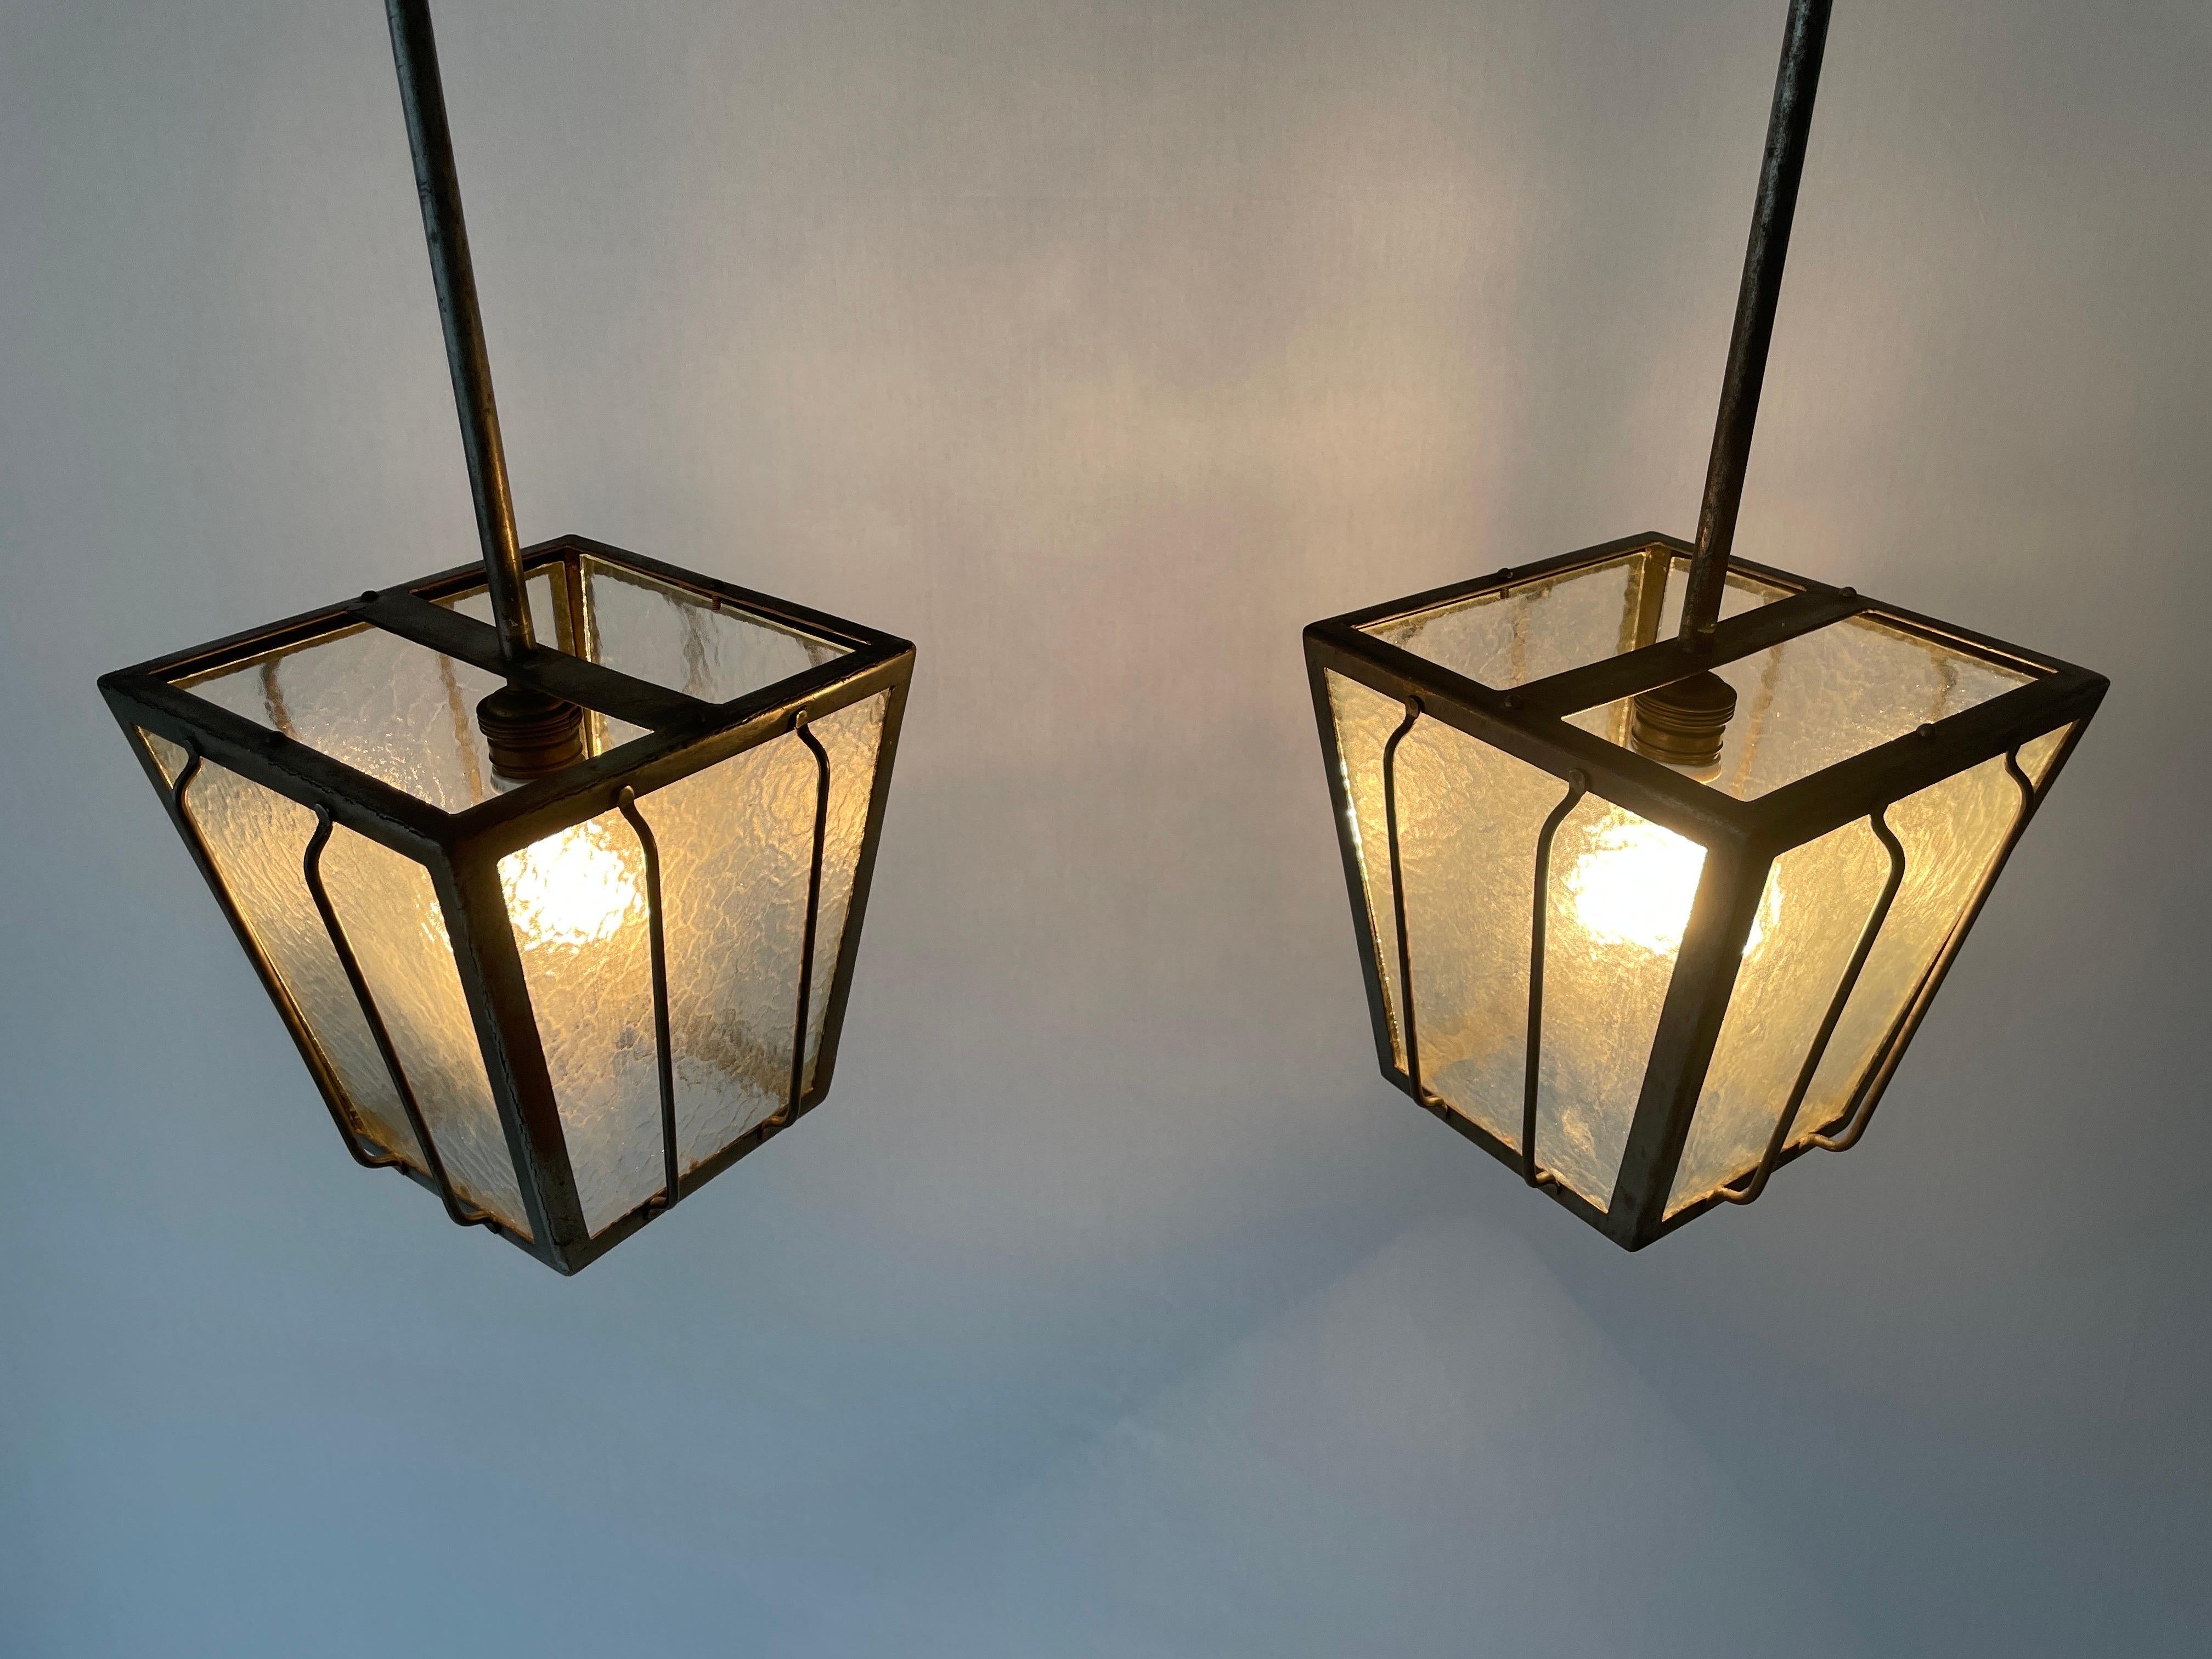 Frosted Glass Milano Apartment Pair of Ceiling Lamps, 1950s, Italy For Sale 5